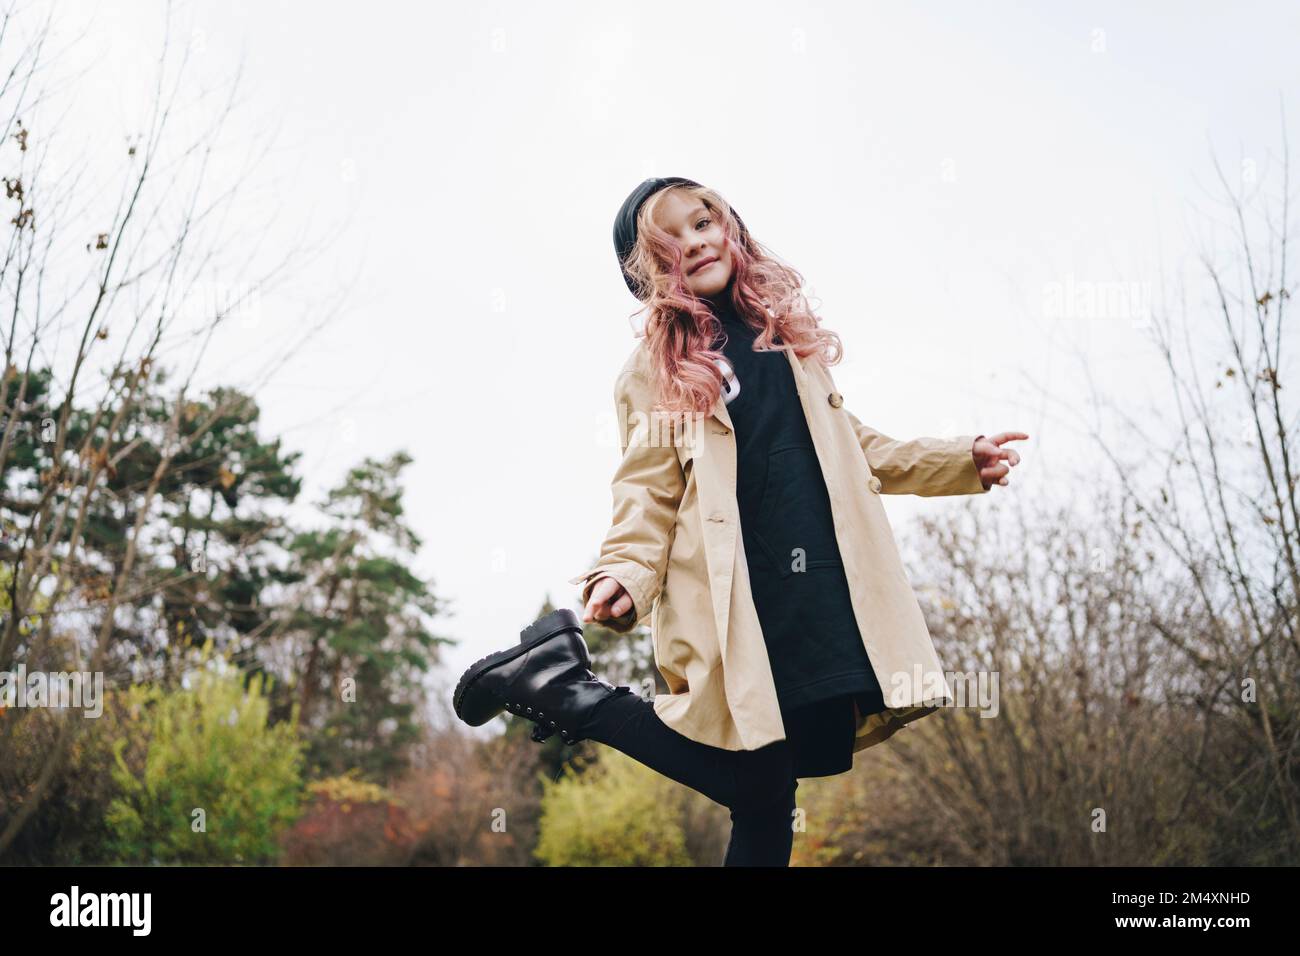 Smiling girl with pink hair standing in park under sky Stock Photo